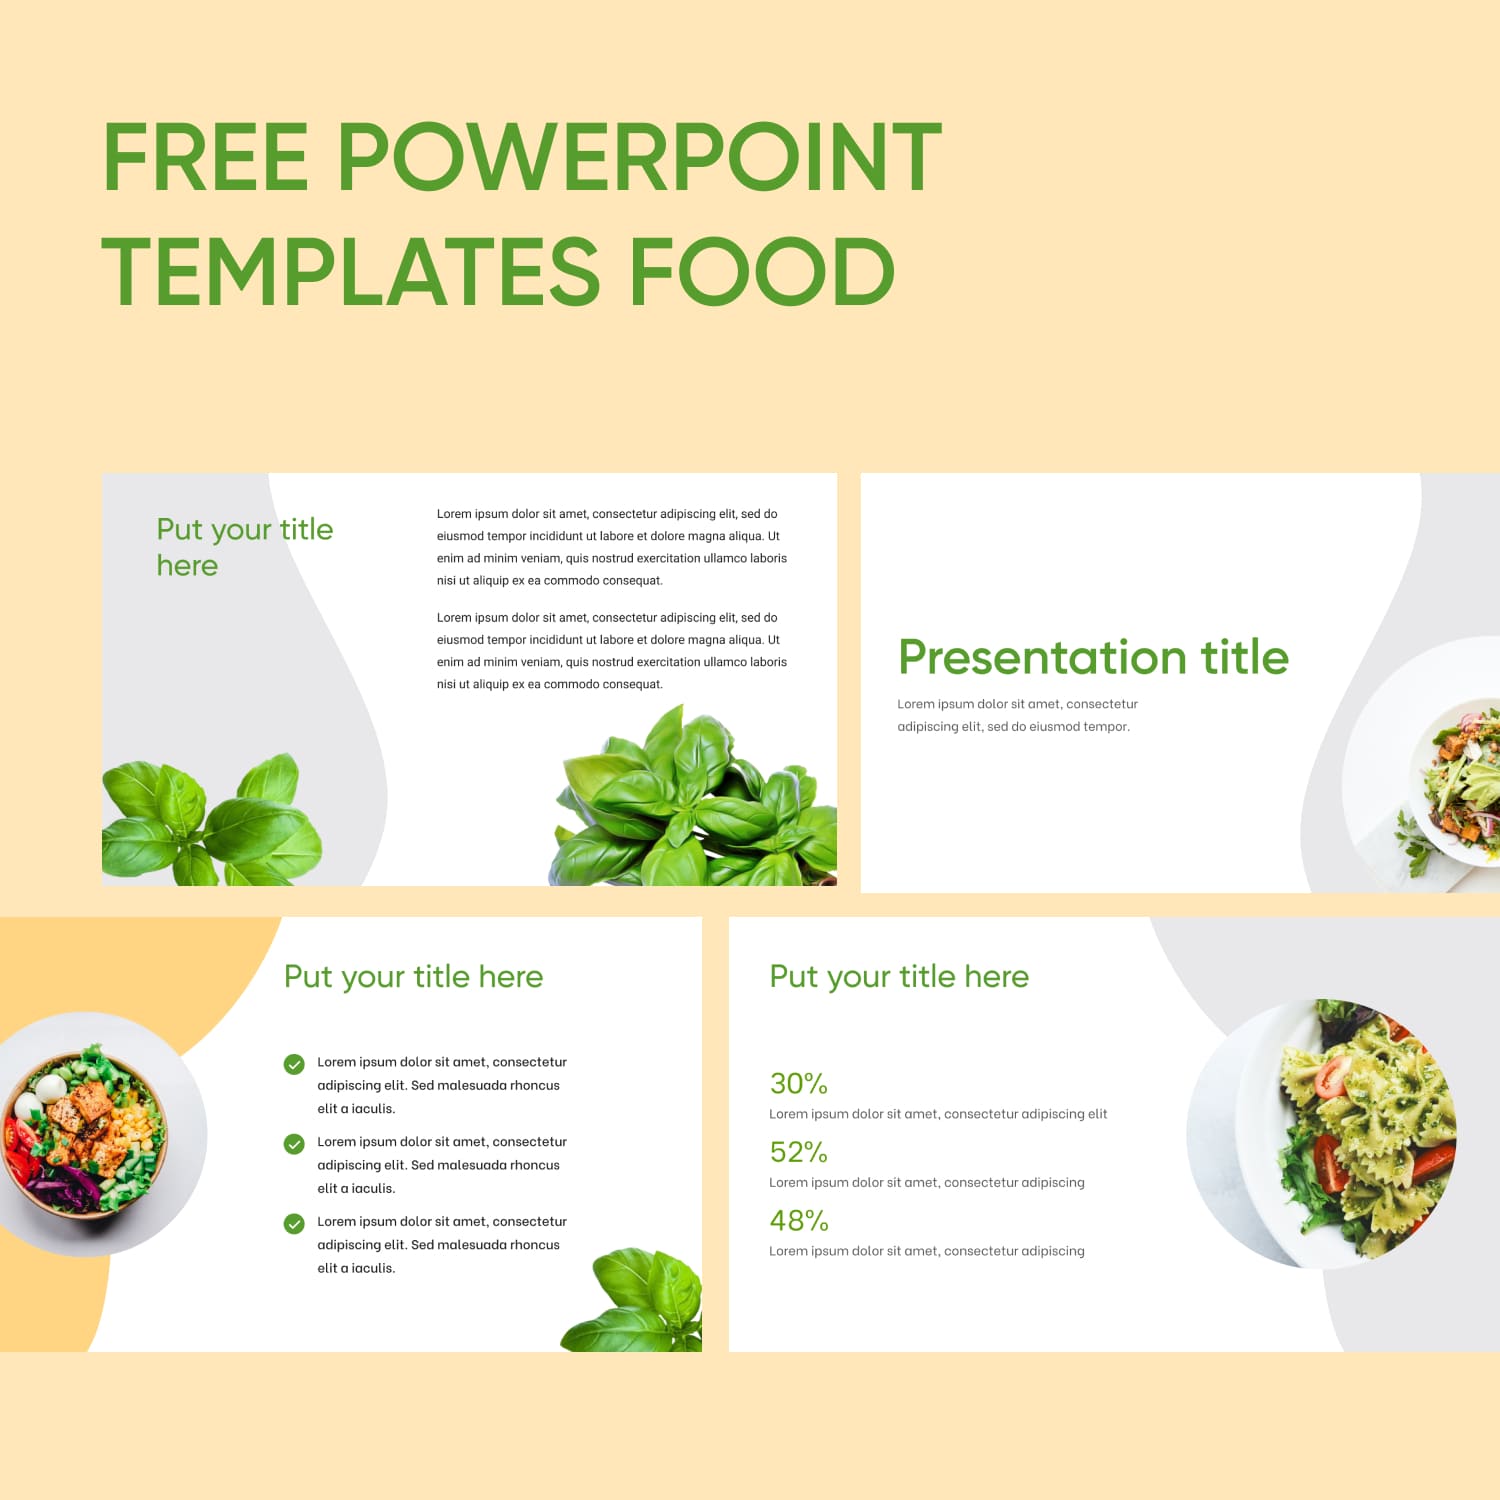 Free Powerpoint Templates Food 1500 1500 1.